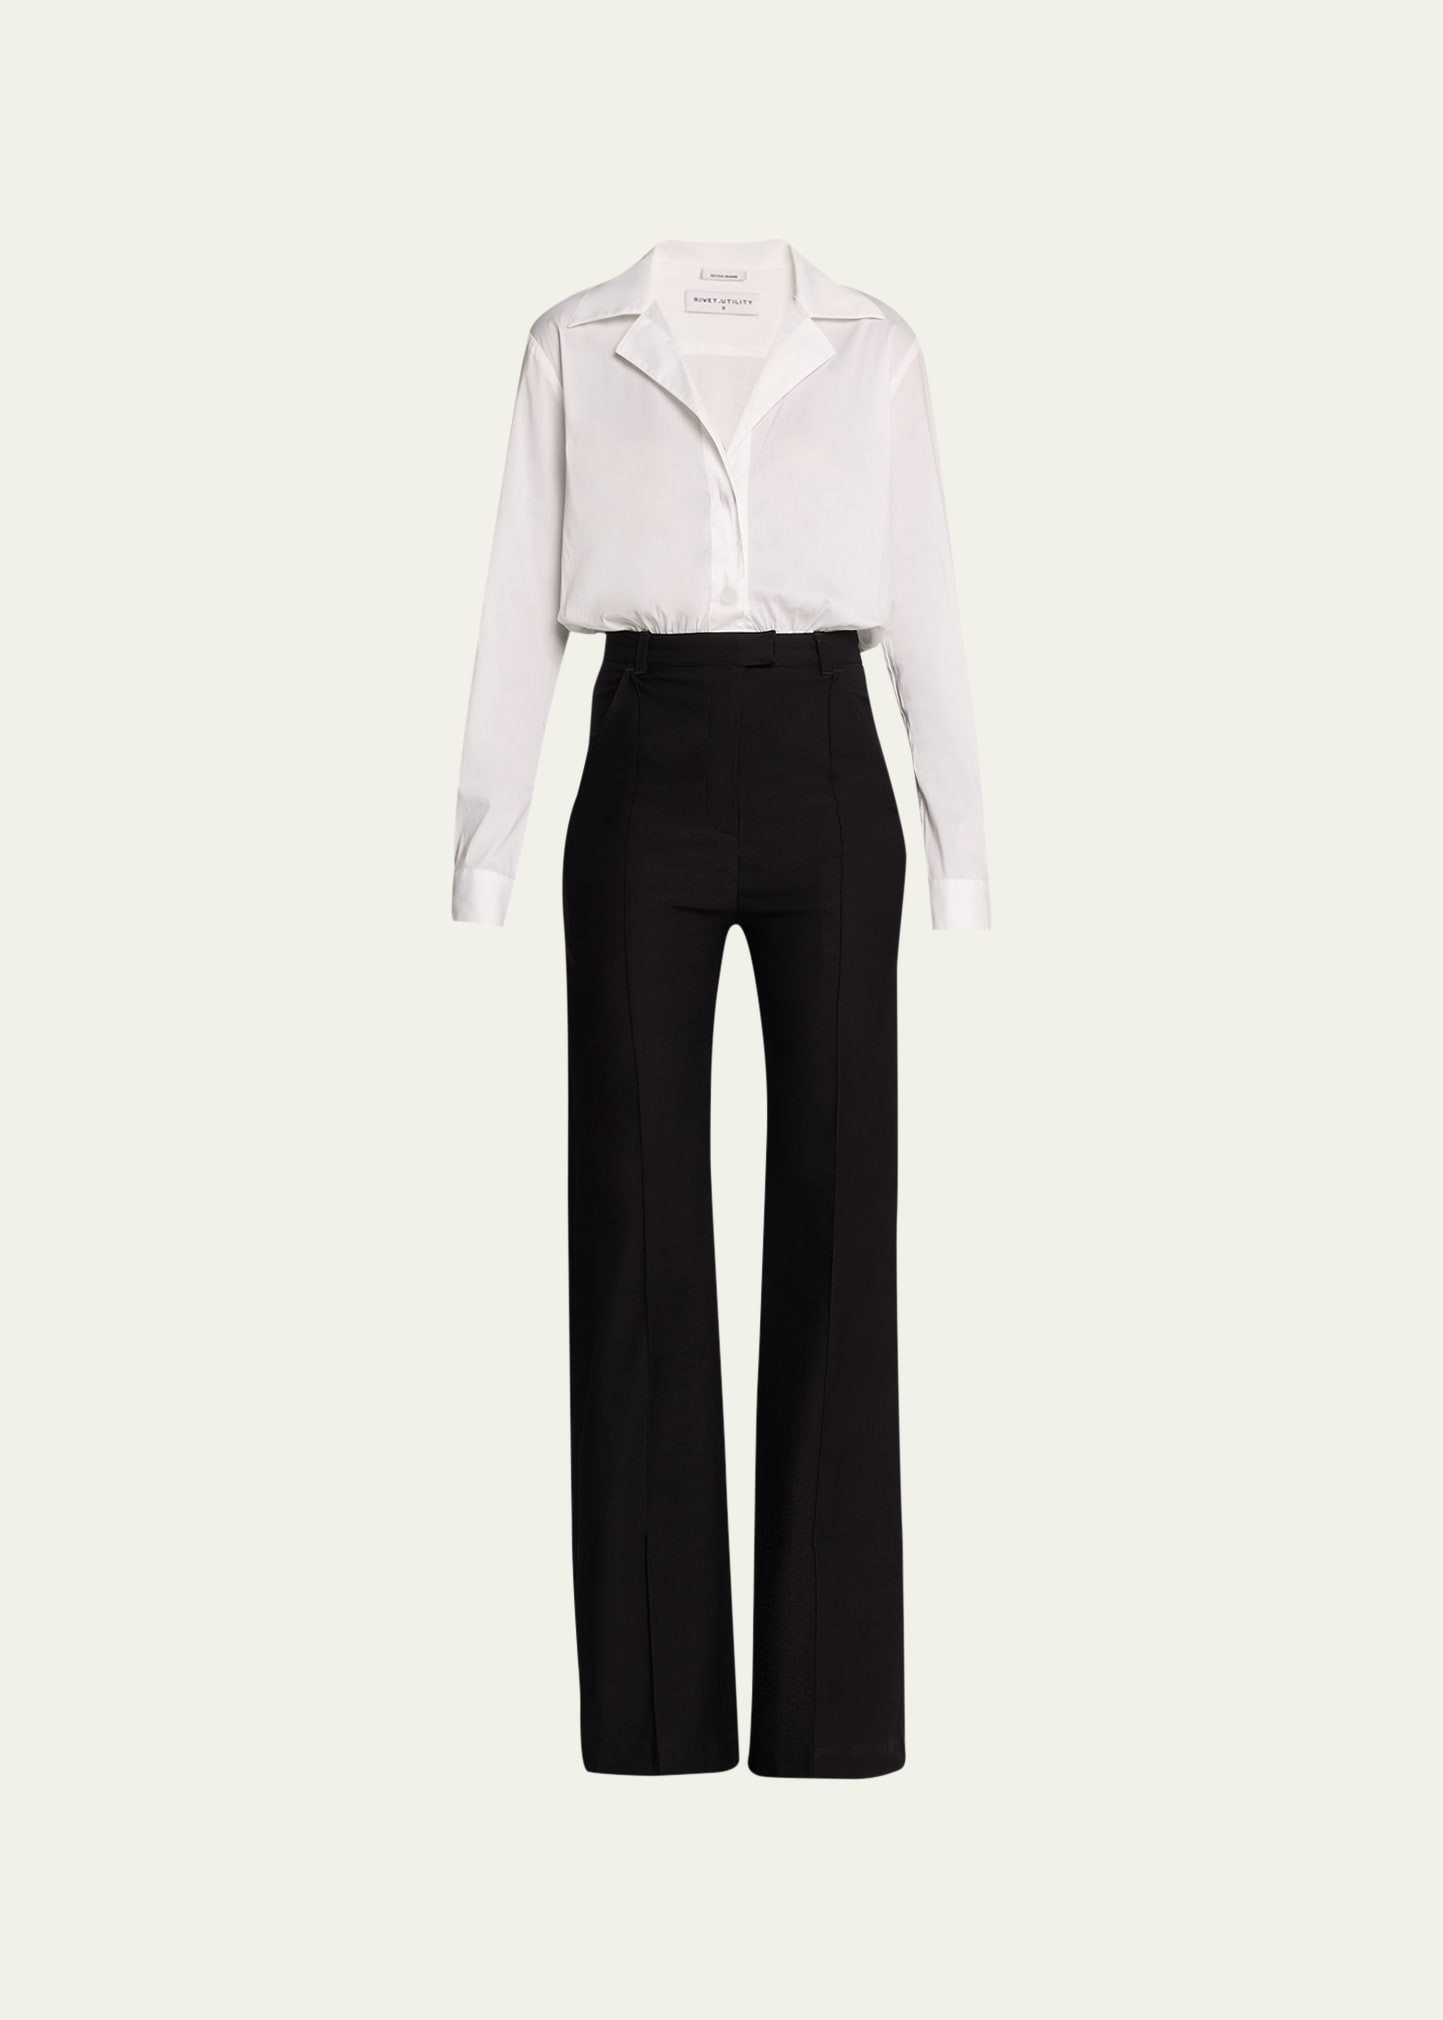 Rivet Utility Boss Babe Button-front Jumpsuit In Black And White